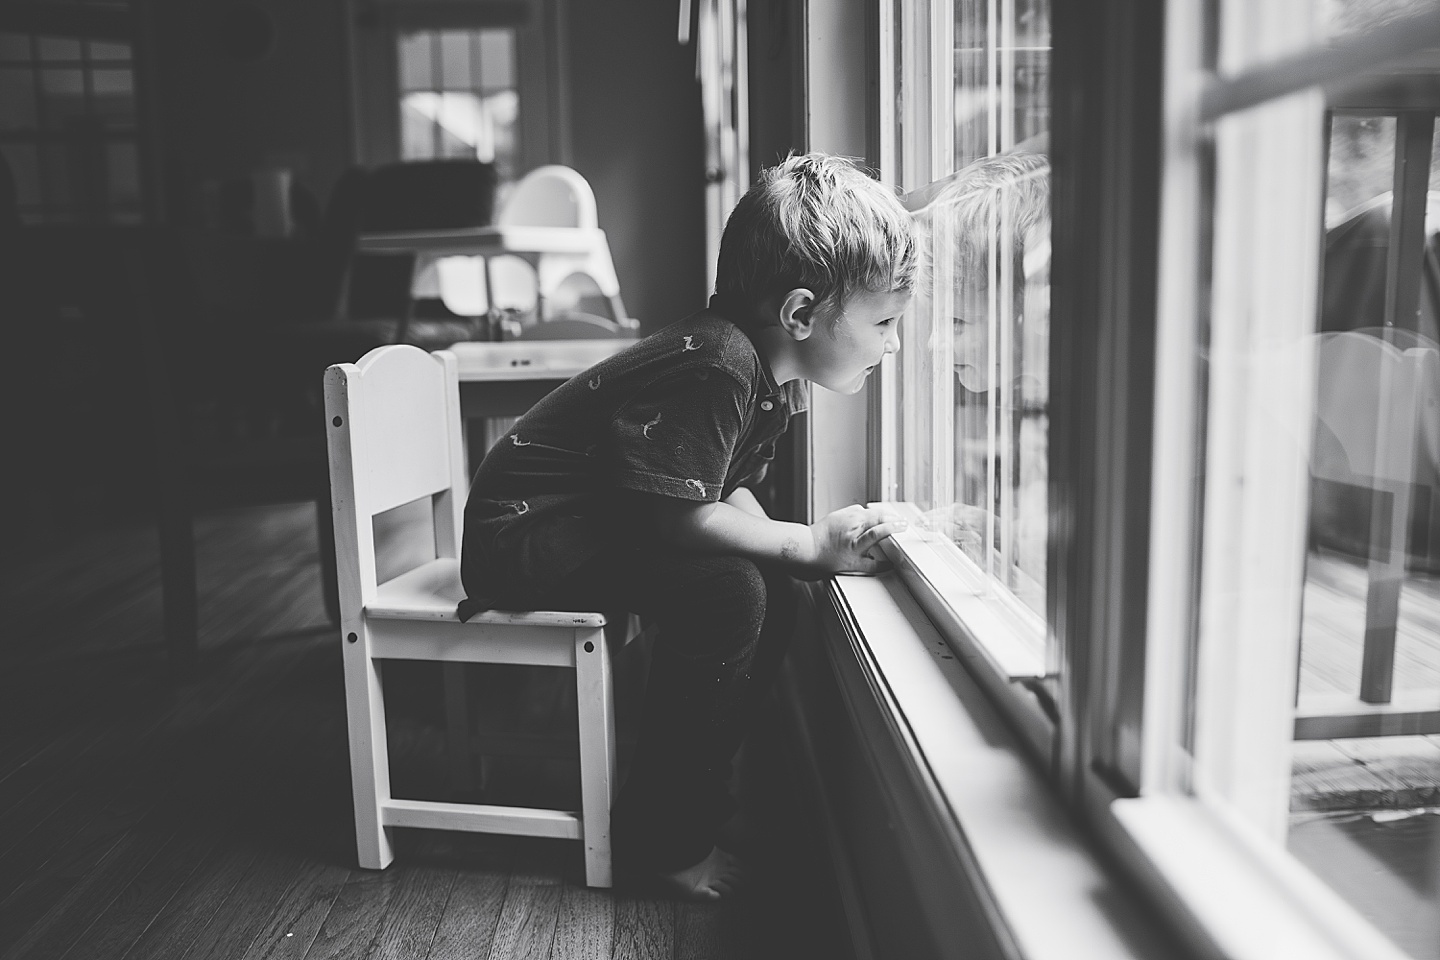 Kid sitting by the window